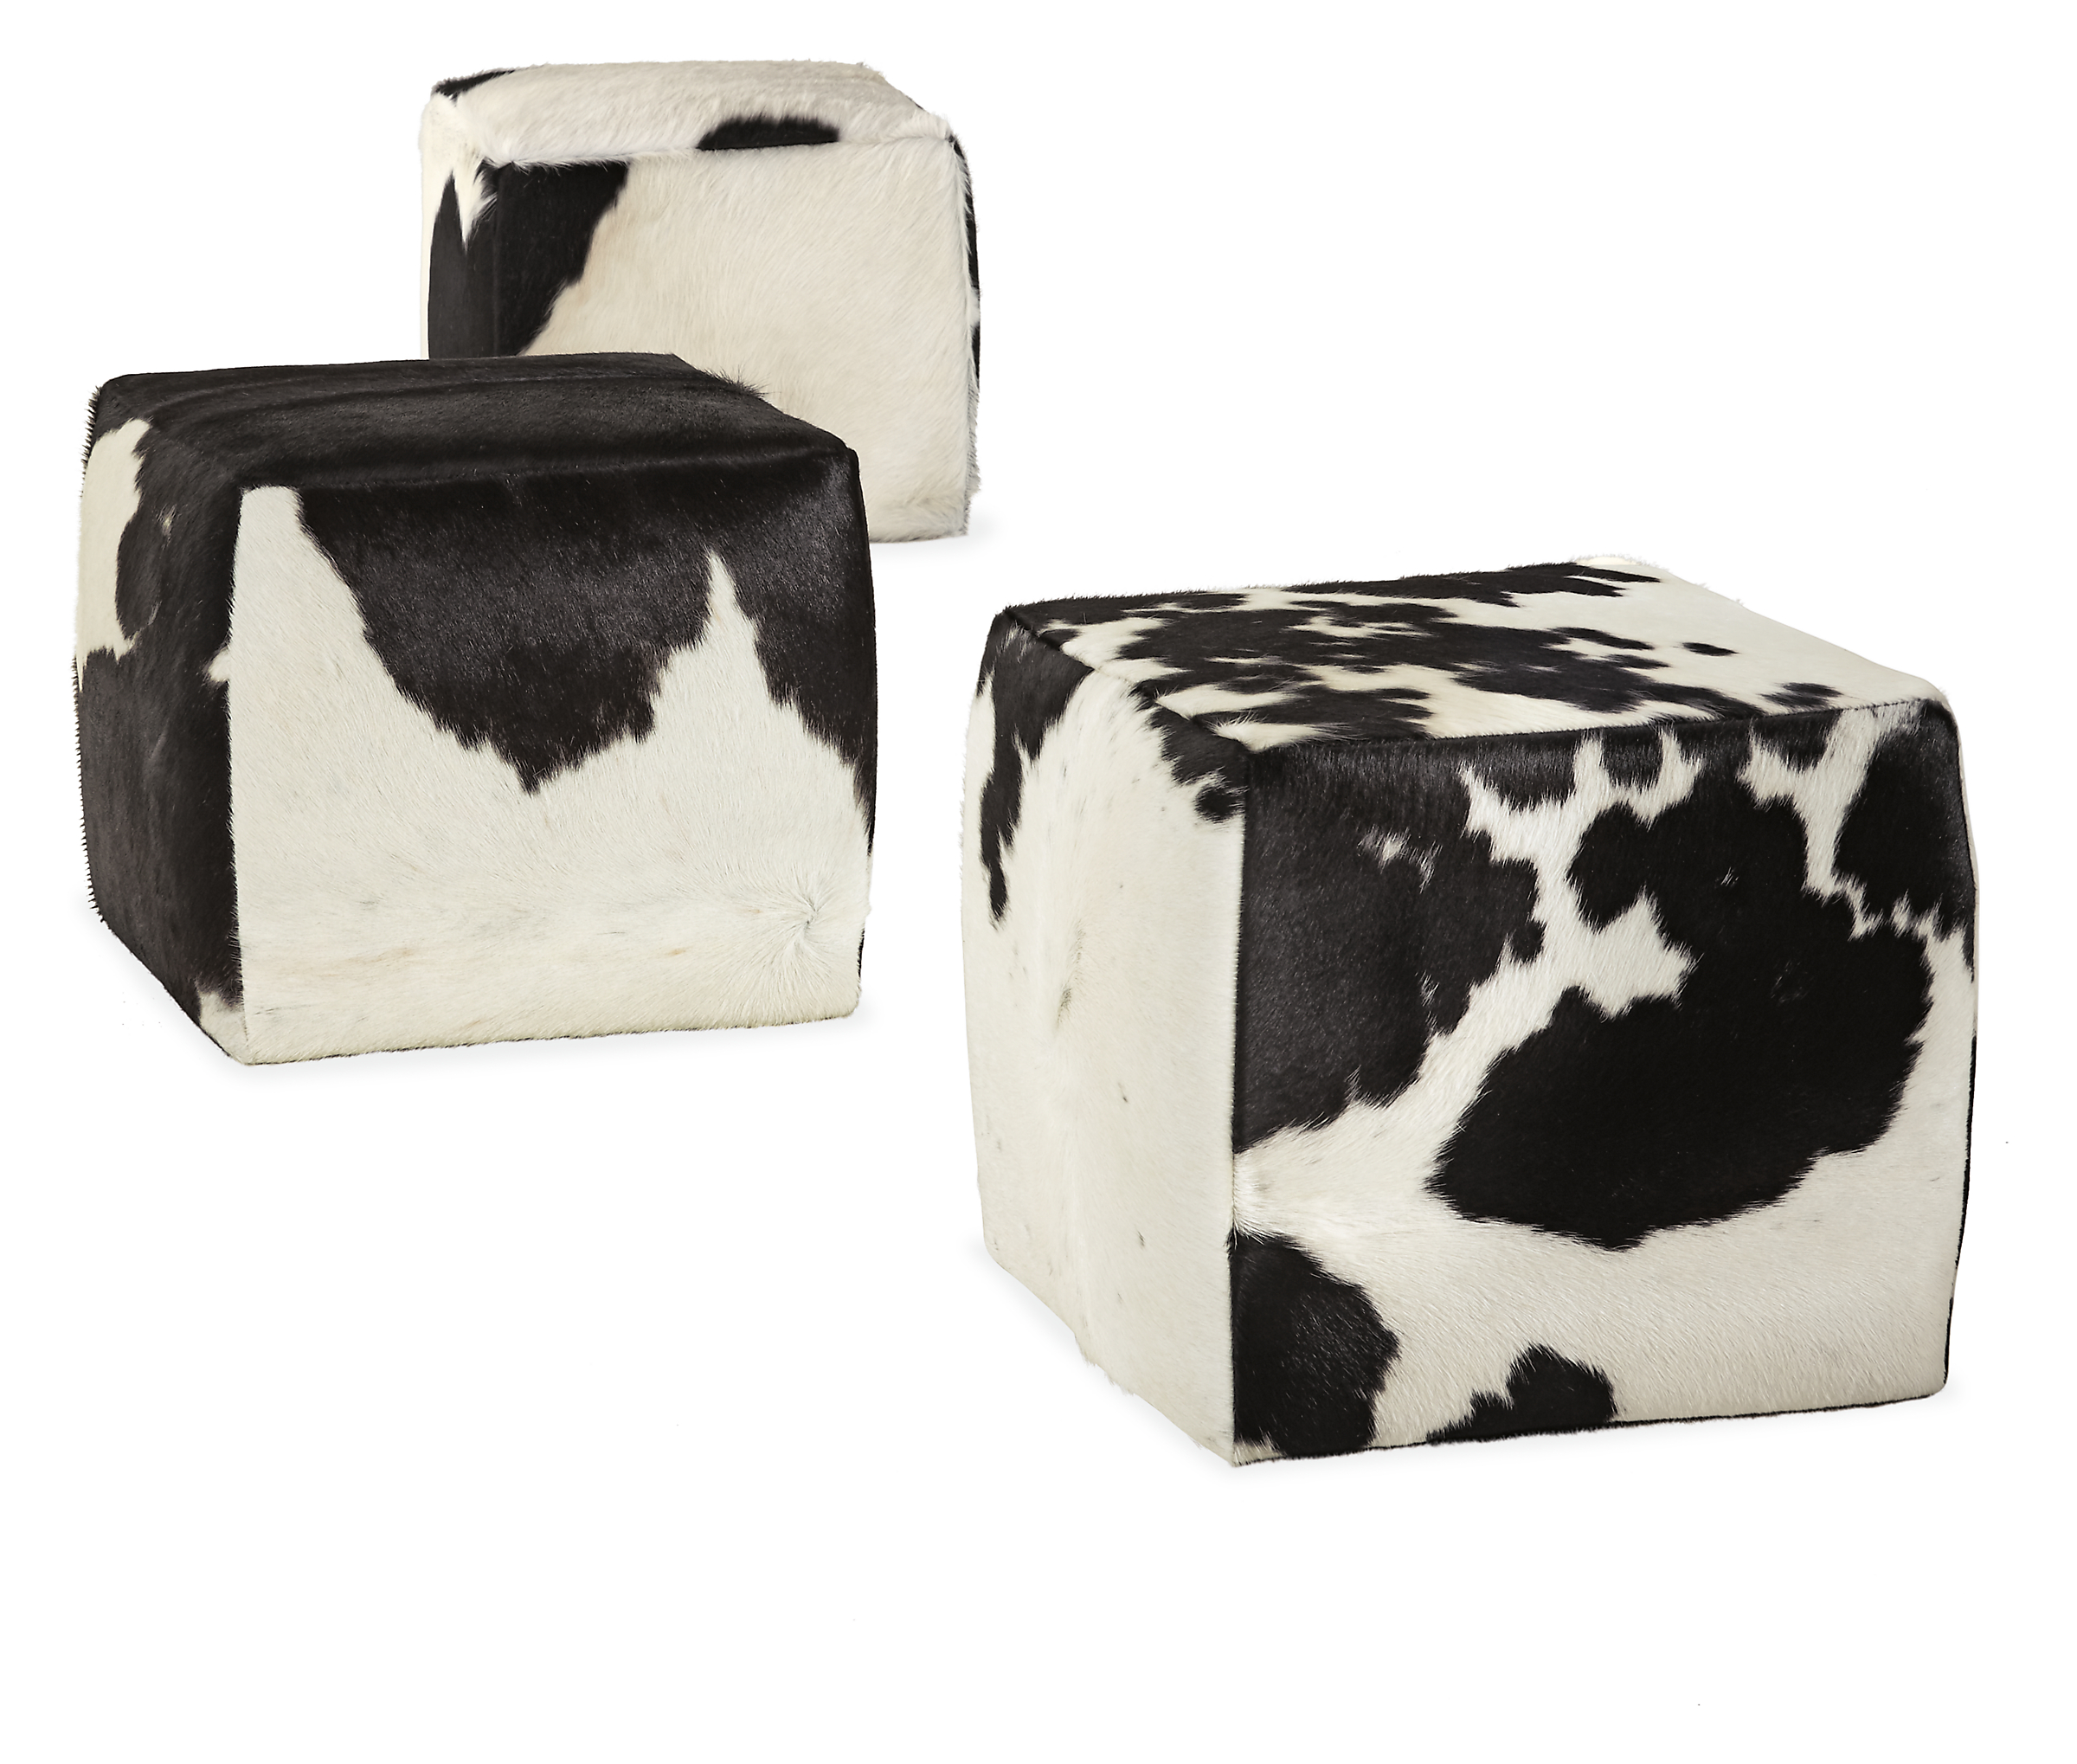 Angled view of Lind 21w 21d 18h Square Ottoman in Cowhide Black.